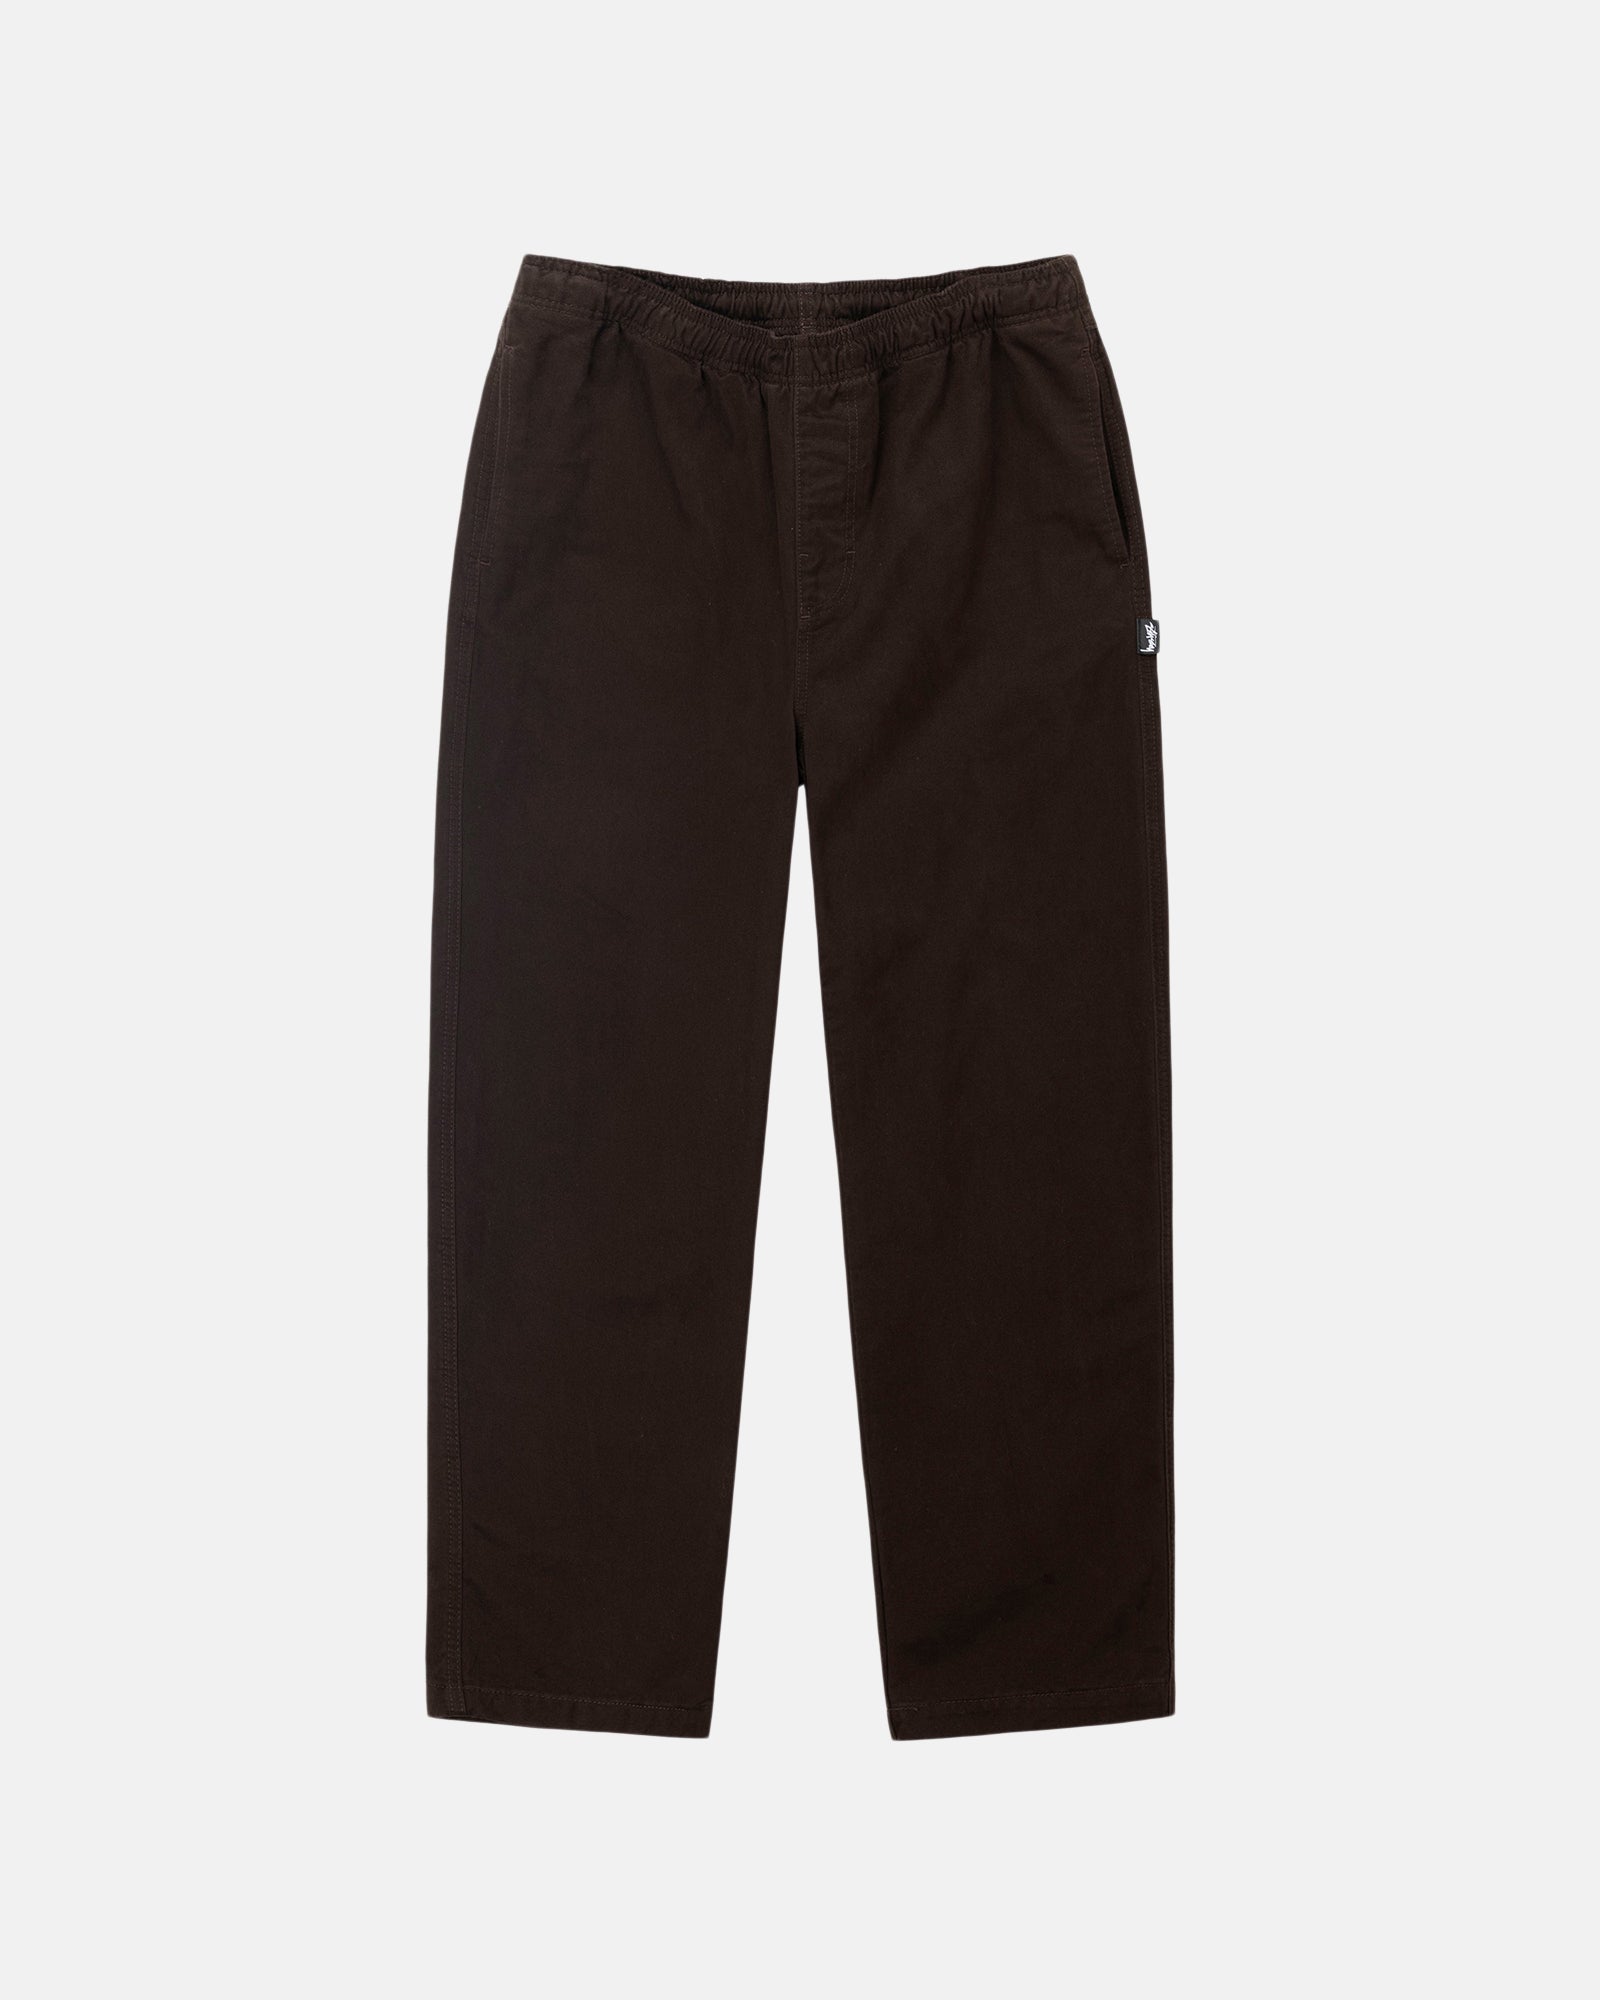 BEACH PANT BRUSHED COTTON